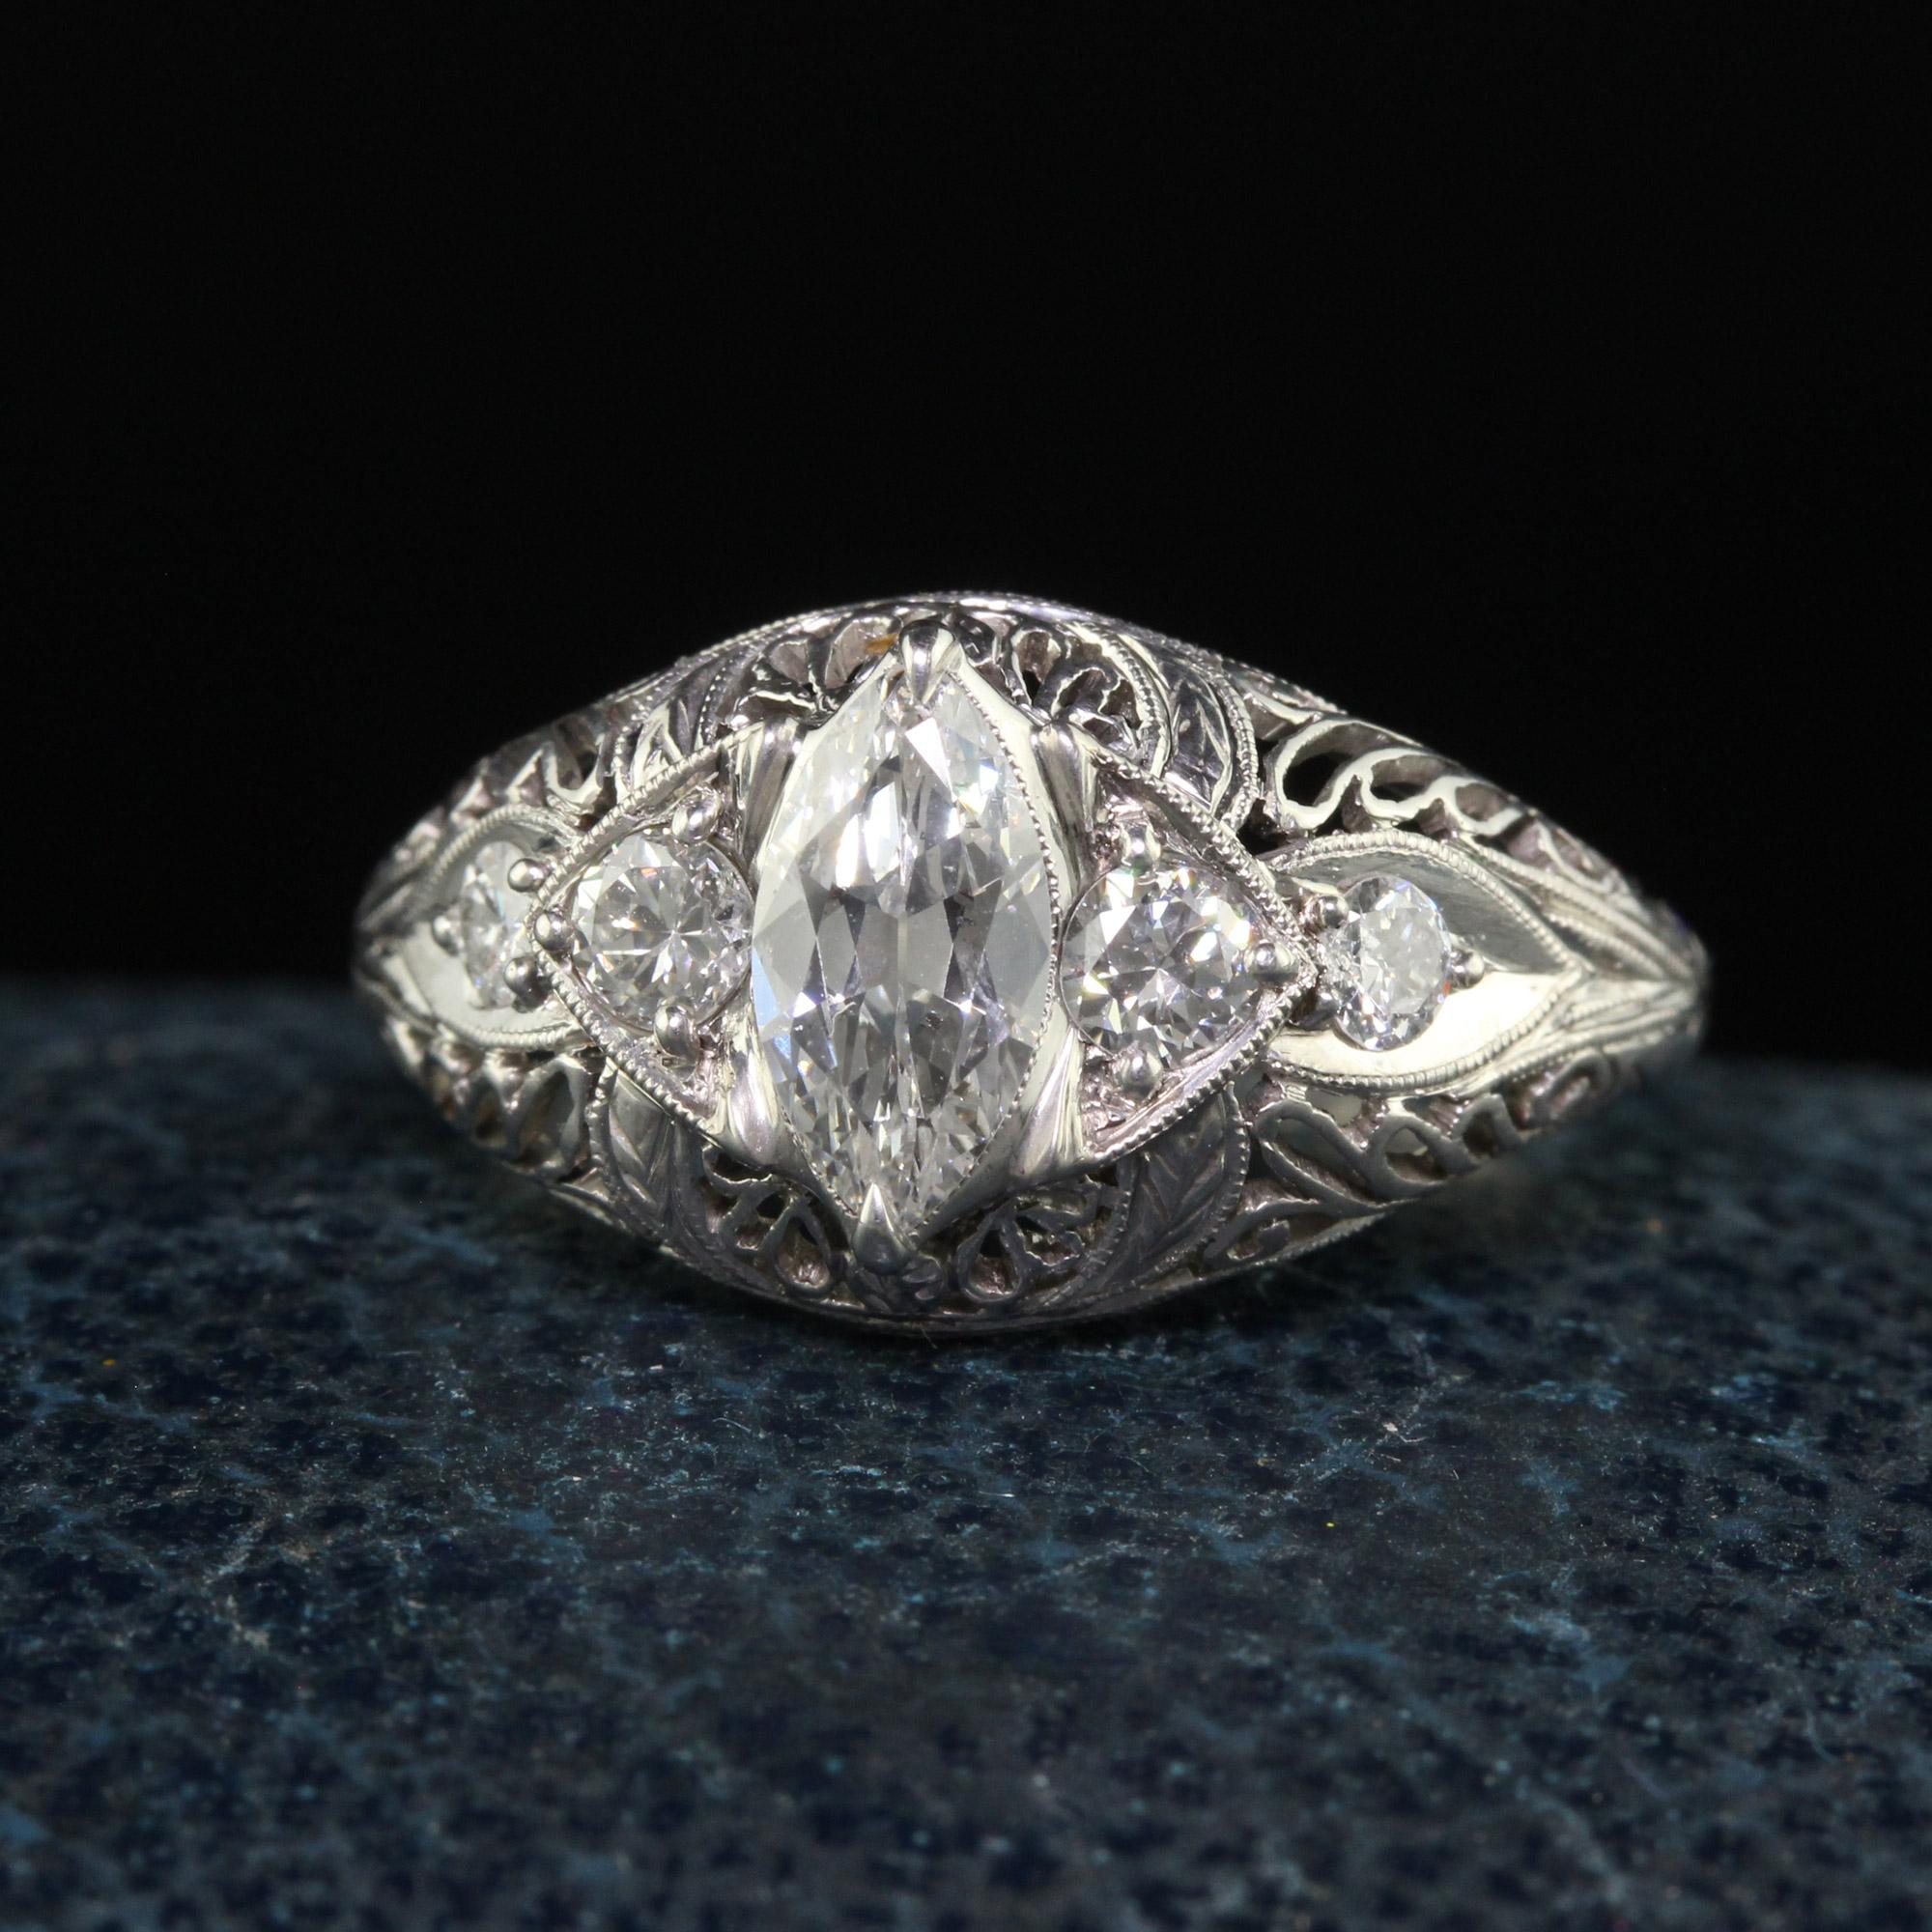 Beautiful Antique Art Deco Platinum Old Marquise Cut Diamond Engagement Ring - GIA. This gorgeous engagement ring is crafted in platinum. The center holds a beautiful old cut marquise diamond and has old European cut diamonds on the sides. They are